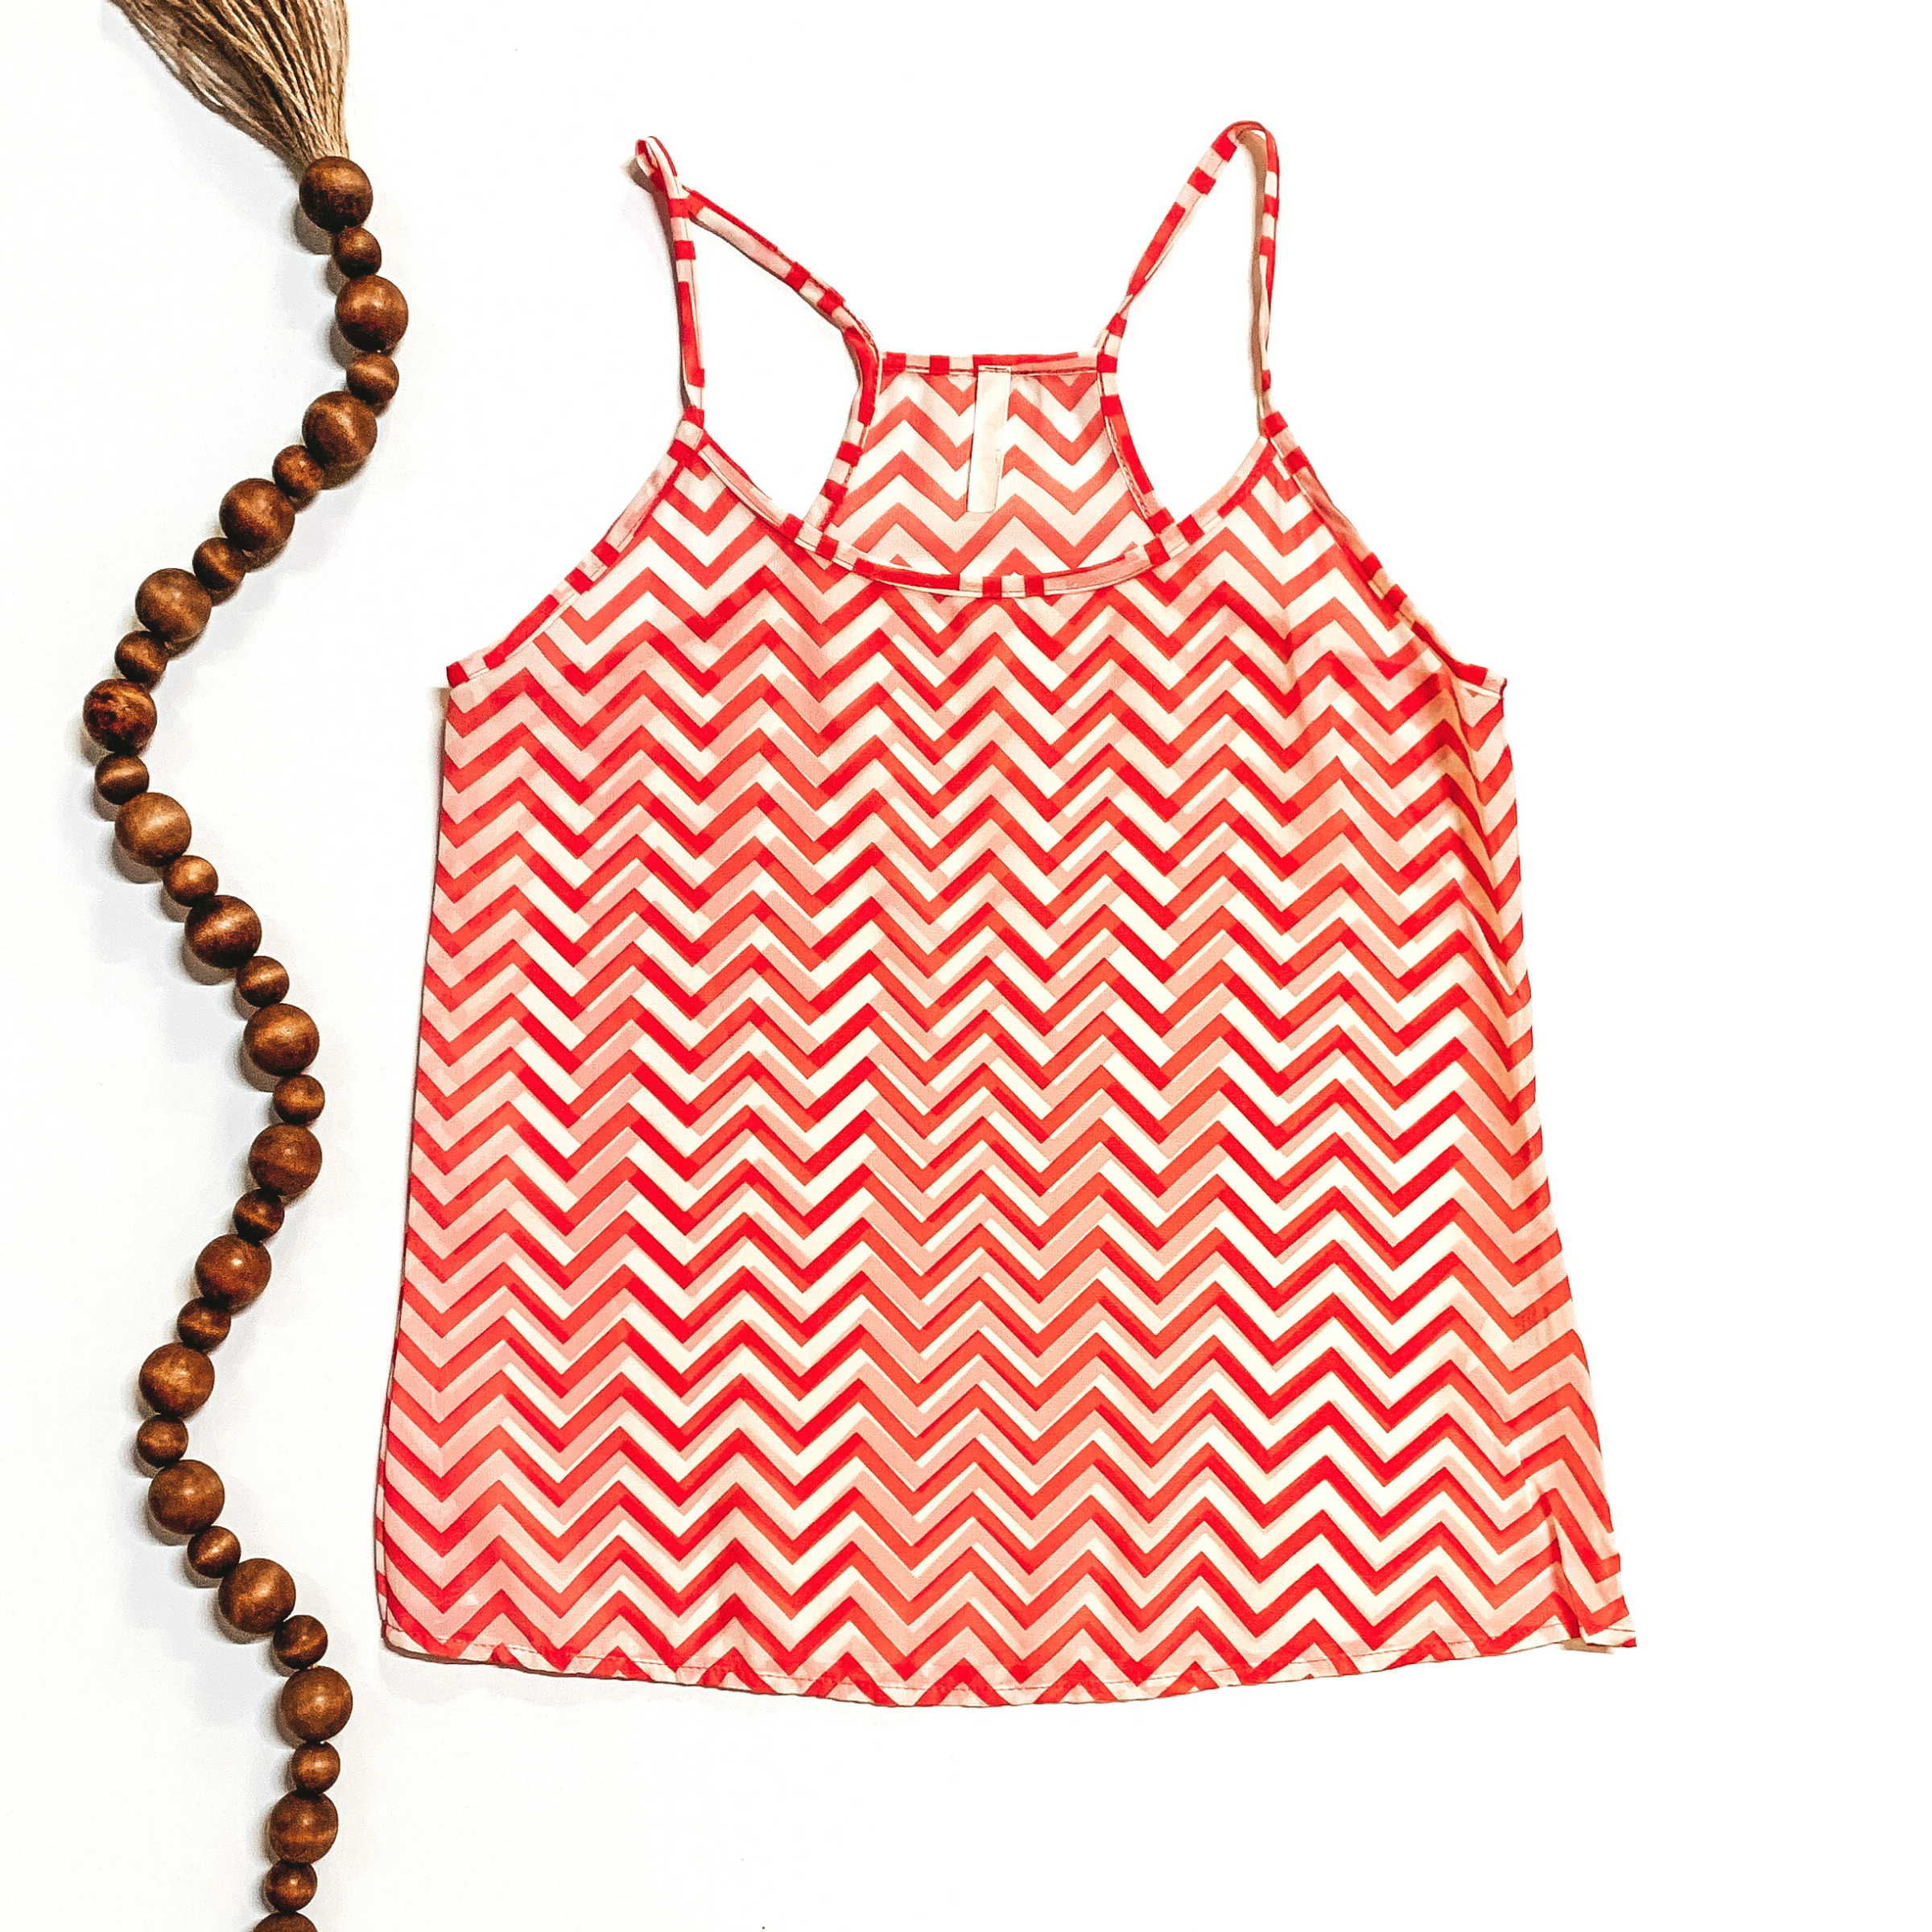 Sheer Chevron Tank Top in Coral and White - Giddy Up Glamour Boutique